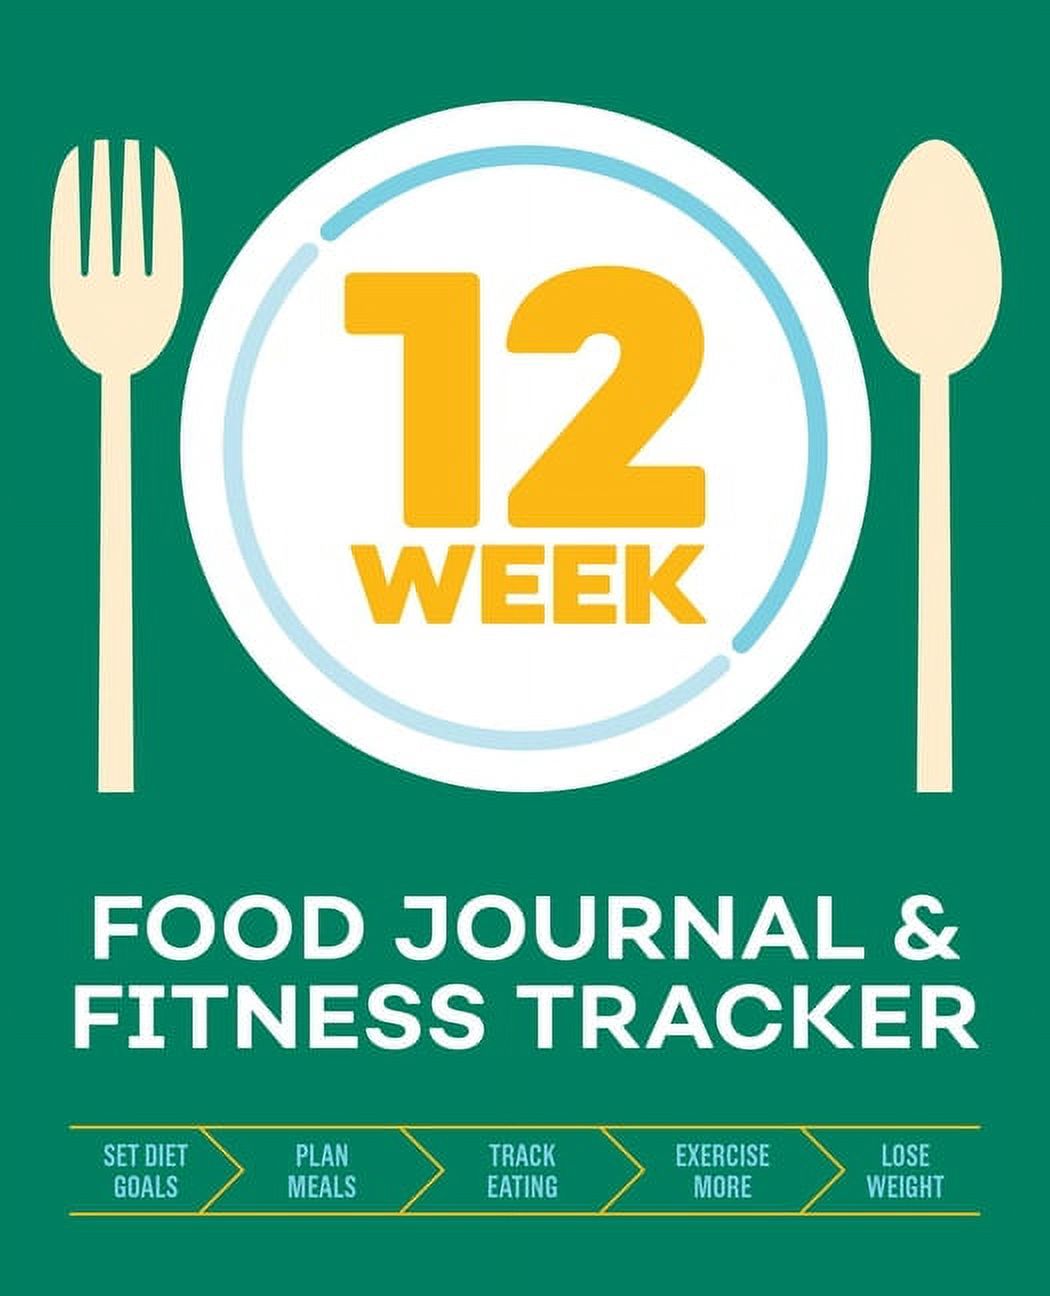 Pre-Owned 12-Week Food Journal and Fitness Tracker: Track Eating, Plan Meals, and Set Diet and Exercise Goals for Optimal Weight Loss Paperback - image 1 of 2